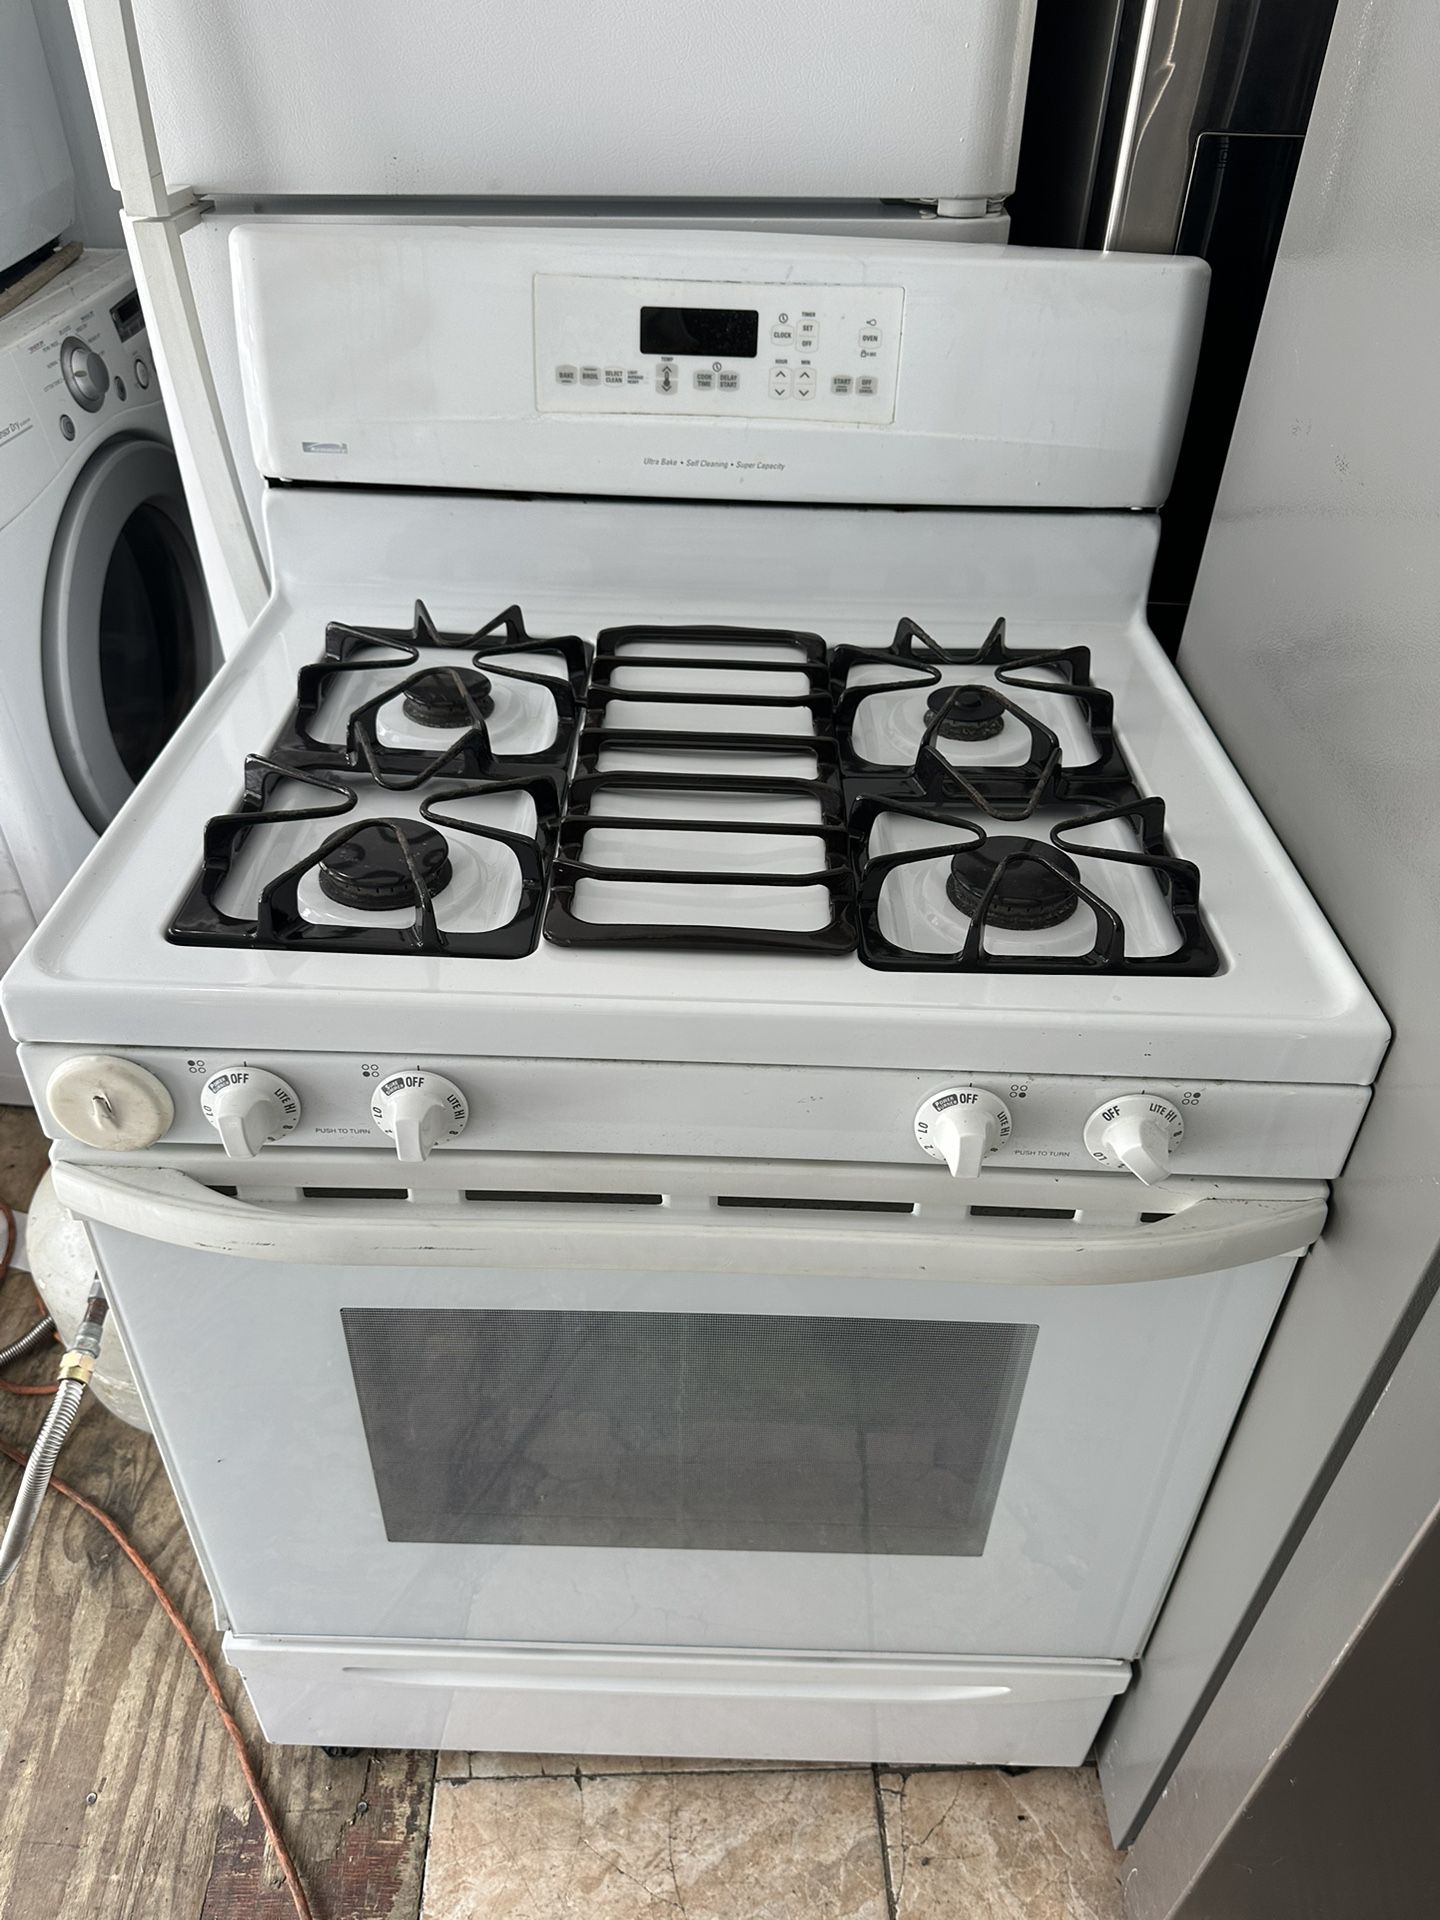 Estufa Eléctrica for Sale in The Bronx, NY - OfferUp